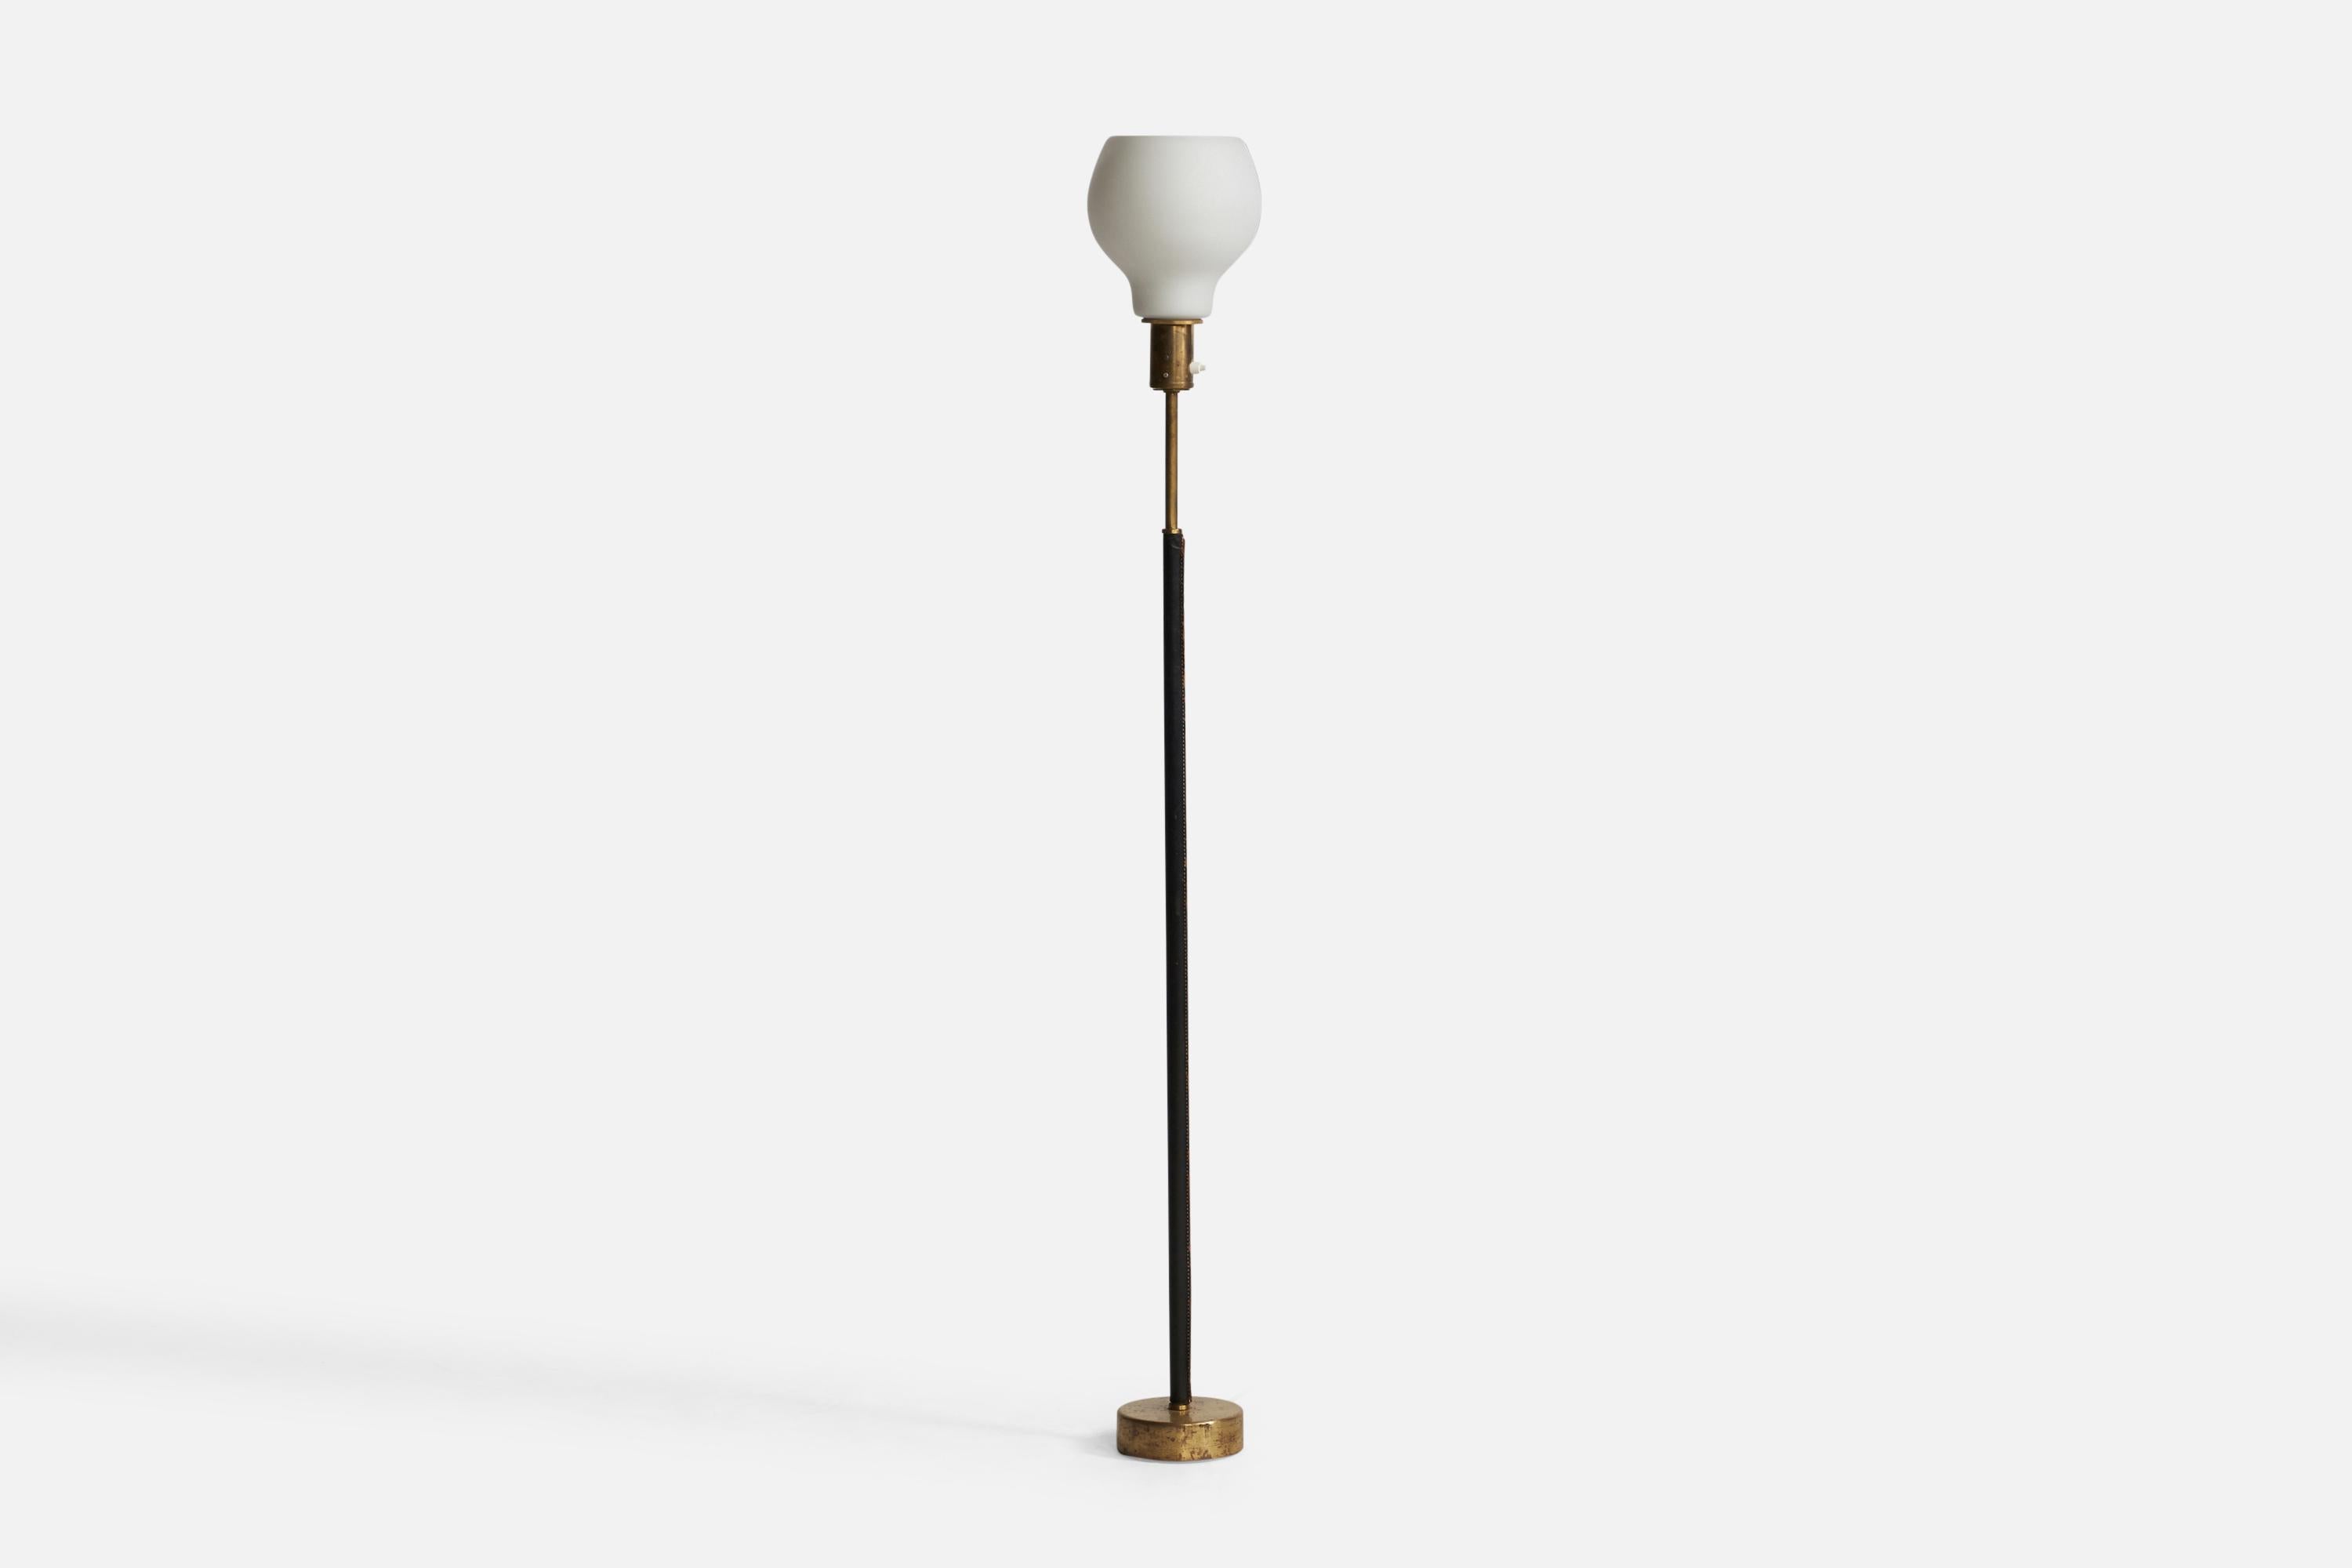 A brass, black-dyed leather and opaline glass floor lamp designed and produced in Finland, c. 1950s.

Overall Dimensions (inches): 58.75” H x 7.65” Diameter. Stated dimensions include shade.

Bulb Specifications: E-26 Bulb

Number of Sockets: 1

All